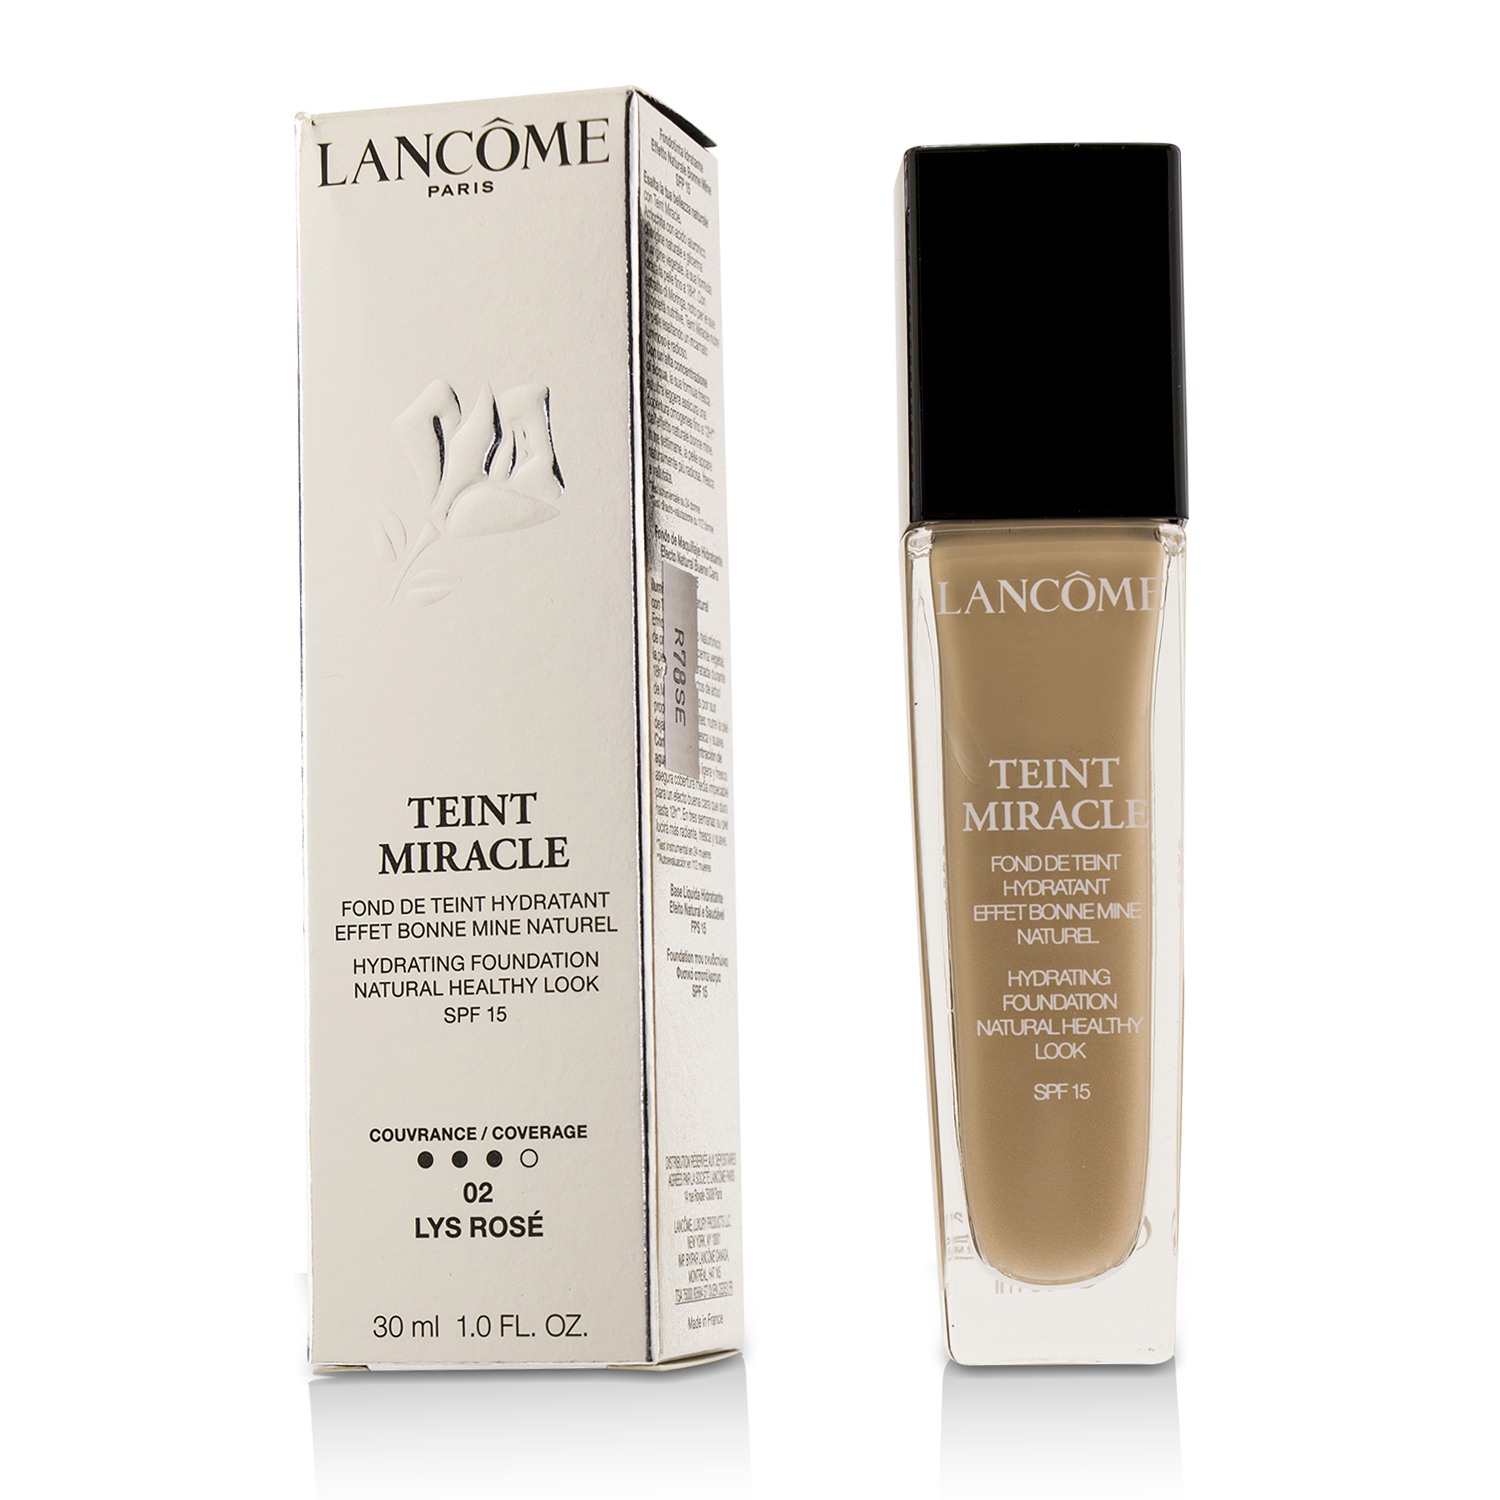 Teint Miracle Hydrating Foundation Natural Healthy Look SPF 15 - # 02 Lys Rose Lancome Image